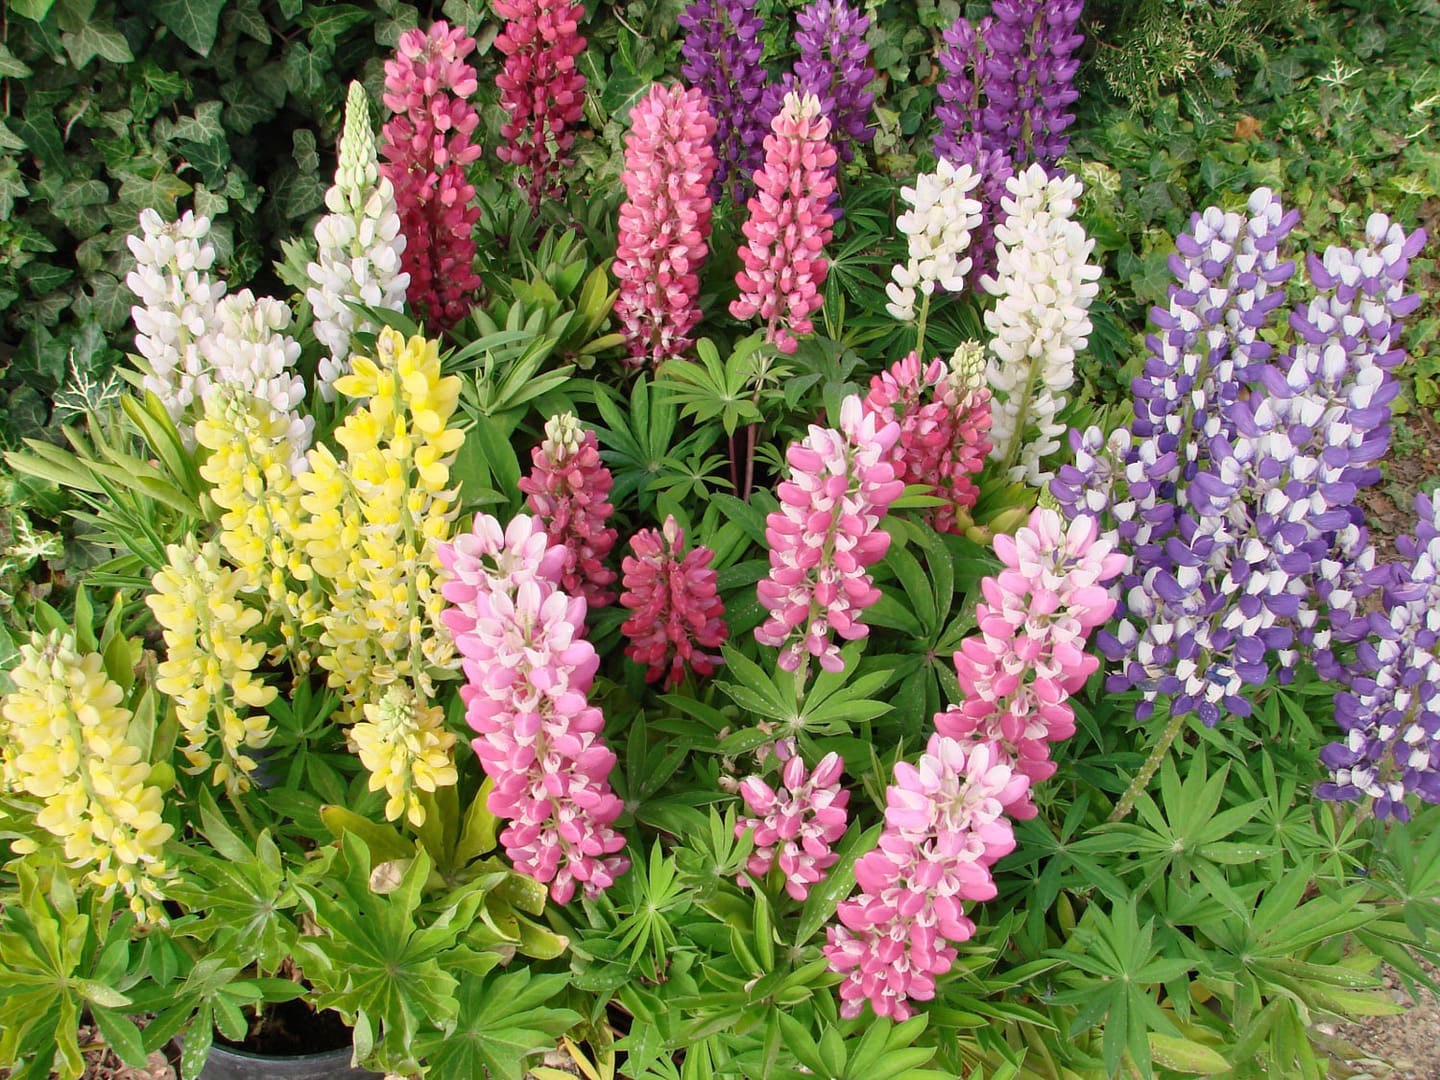 Lupin Mini Gallery Mix
Bloom, Seed
HMClause_Tezier, 02.2016
Lupinus Mini Gallery Mix 3.jpg
16LUP-9485.jpg